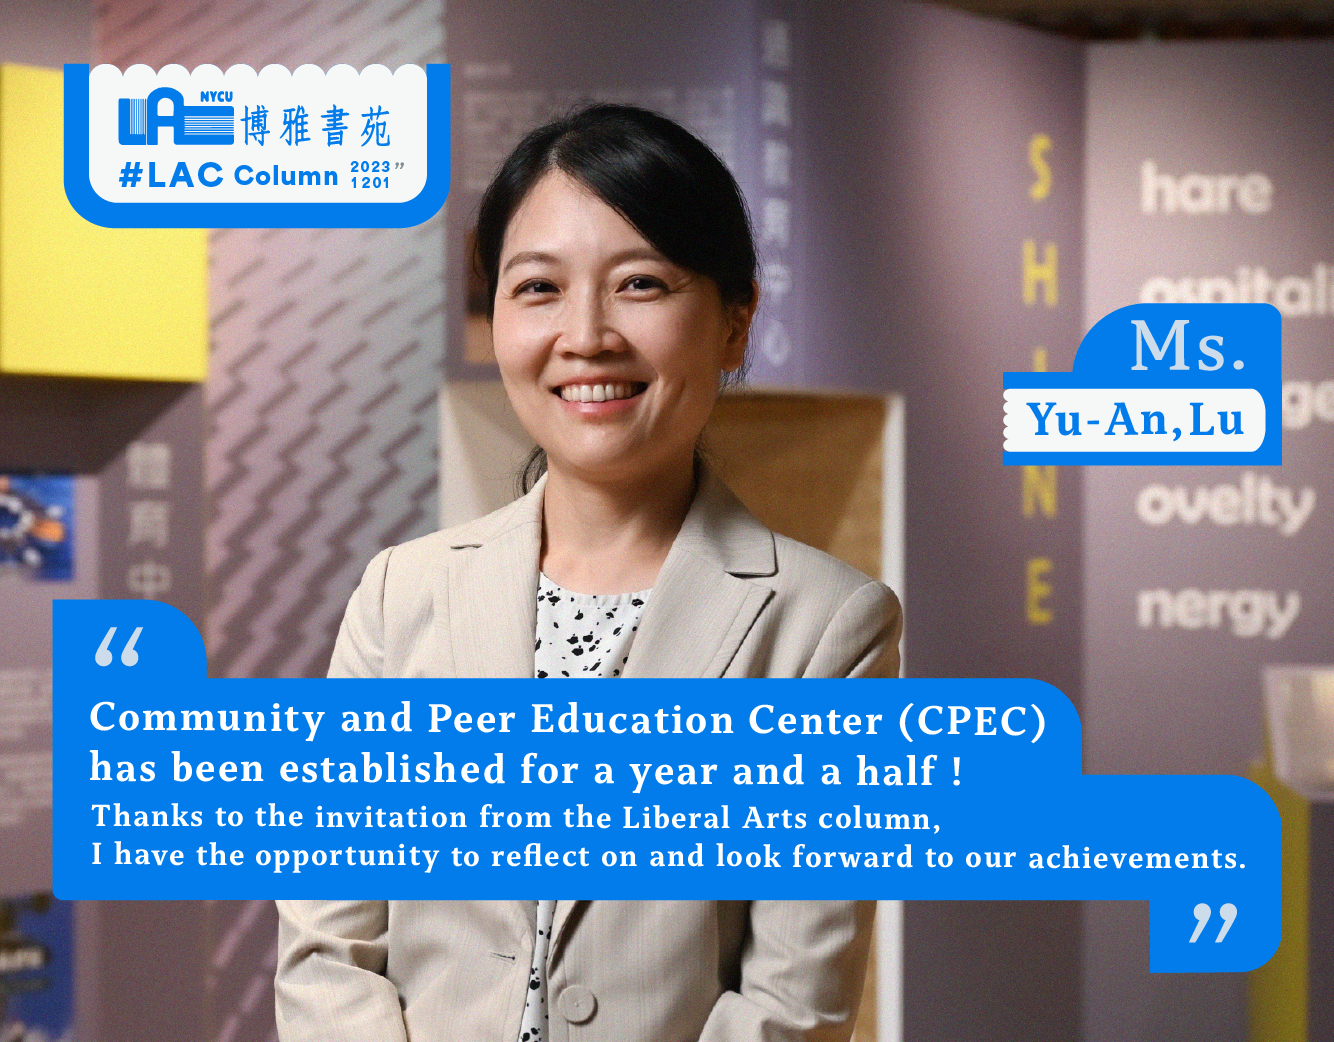 Community and Peer Education Center (CPEC) has been established for a year and a half! – Yu-